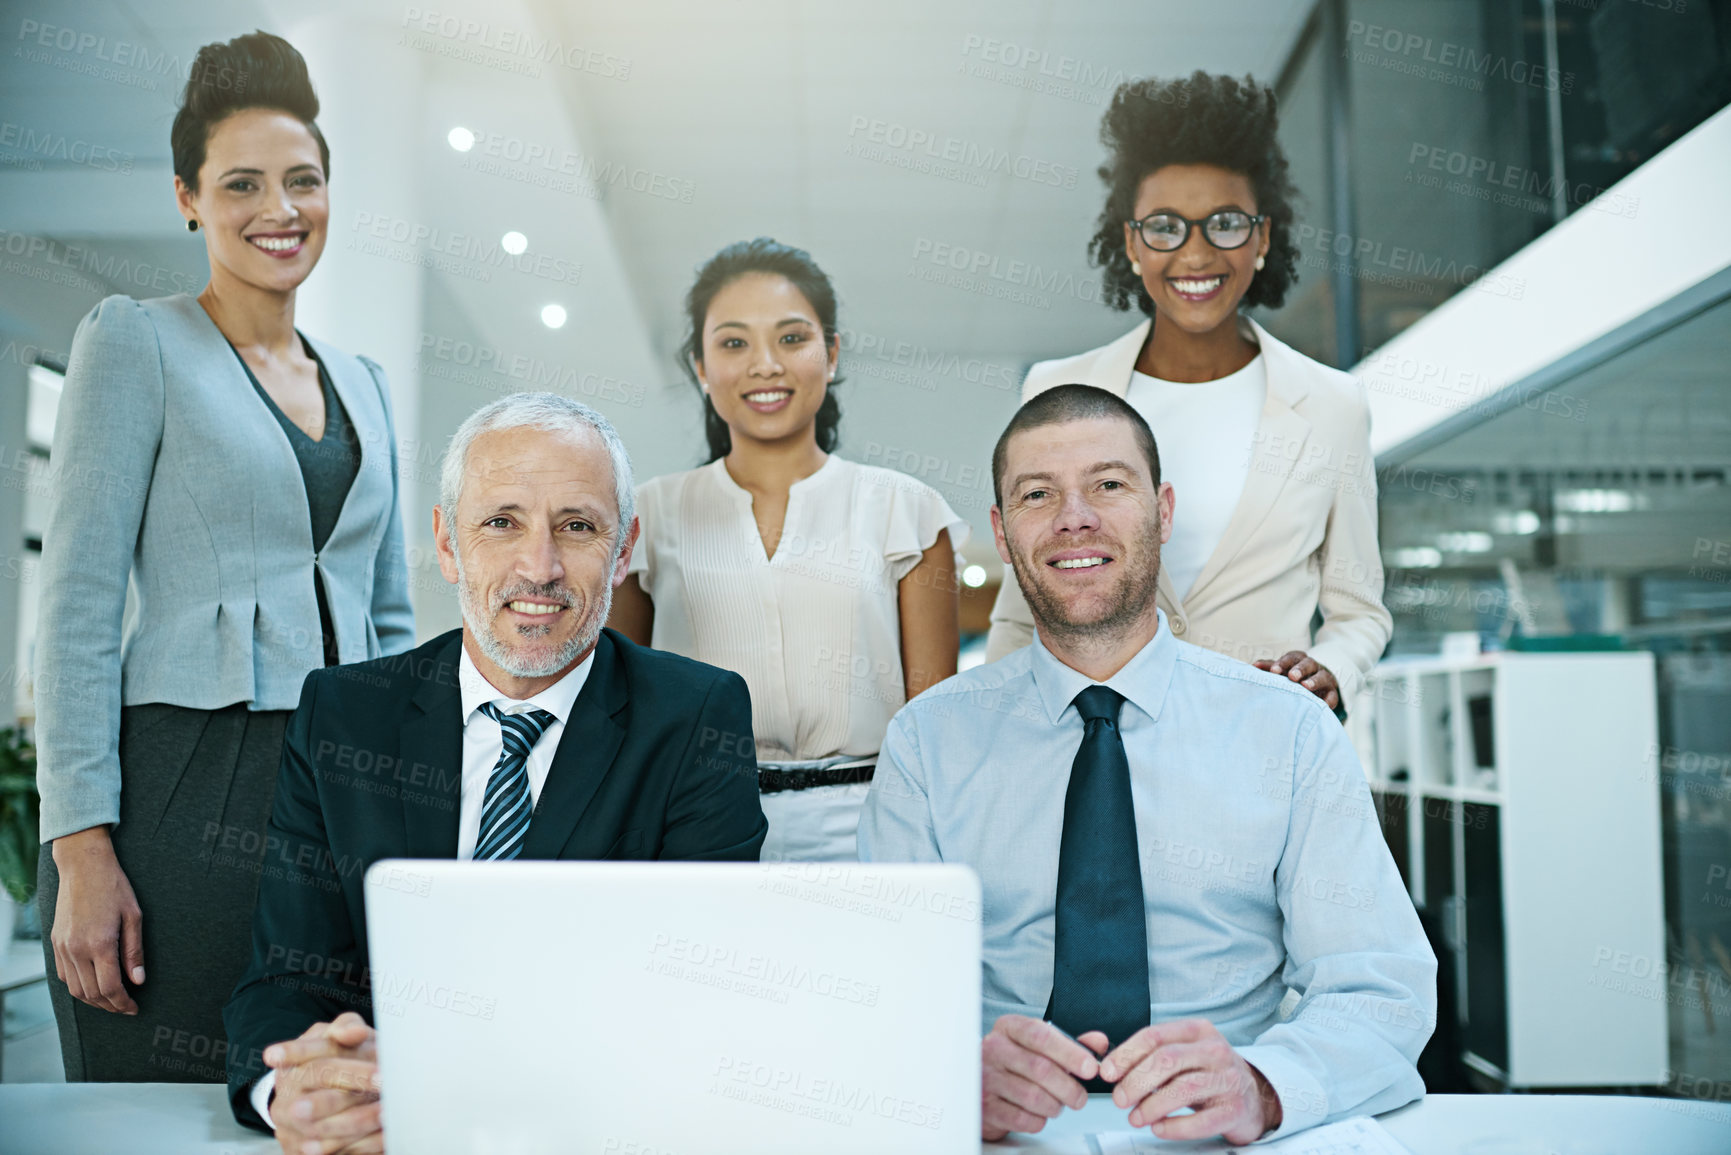 Buy stock photo Portrait of a group of businesspeople working together